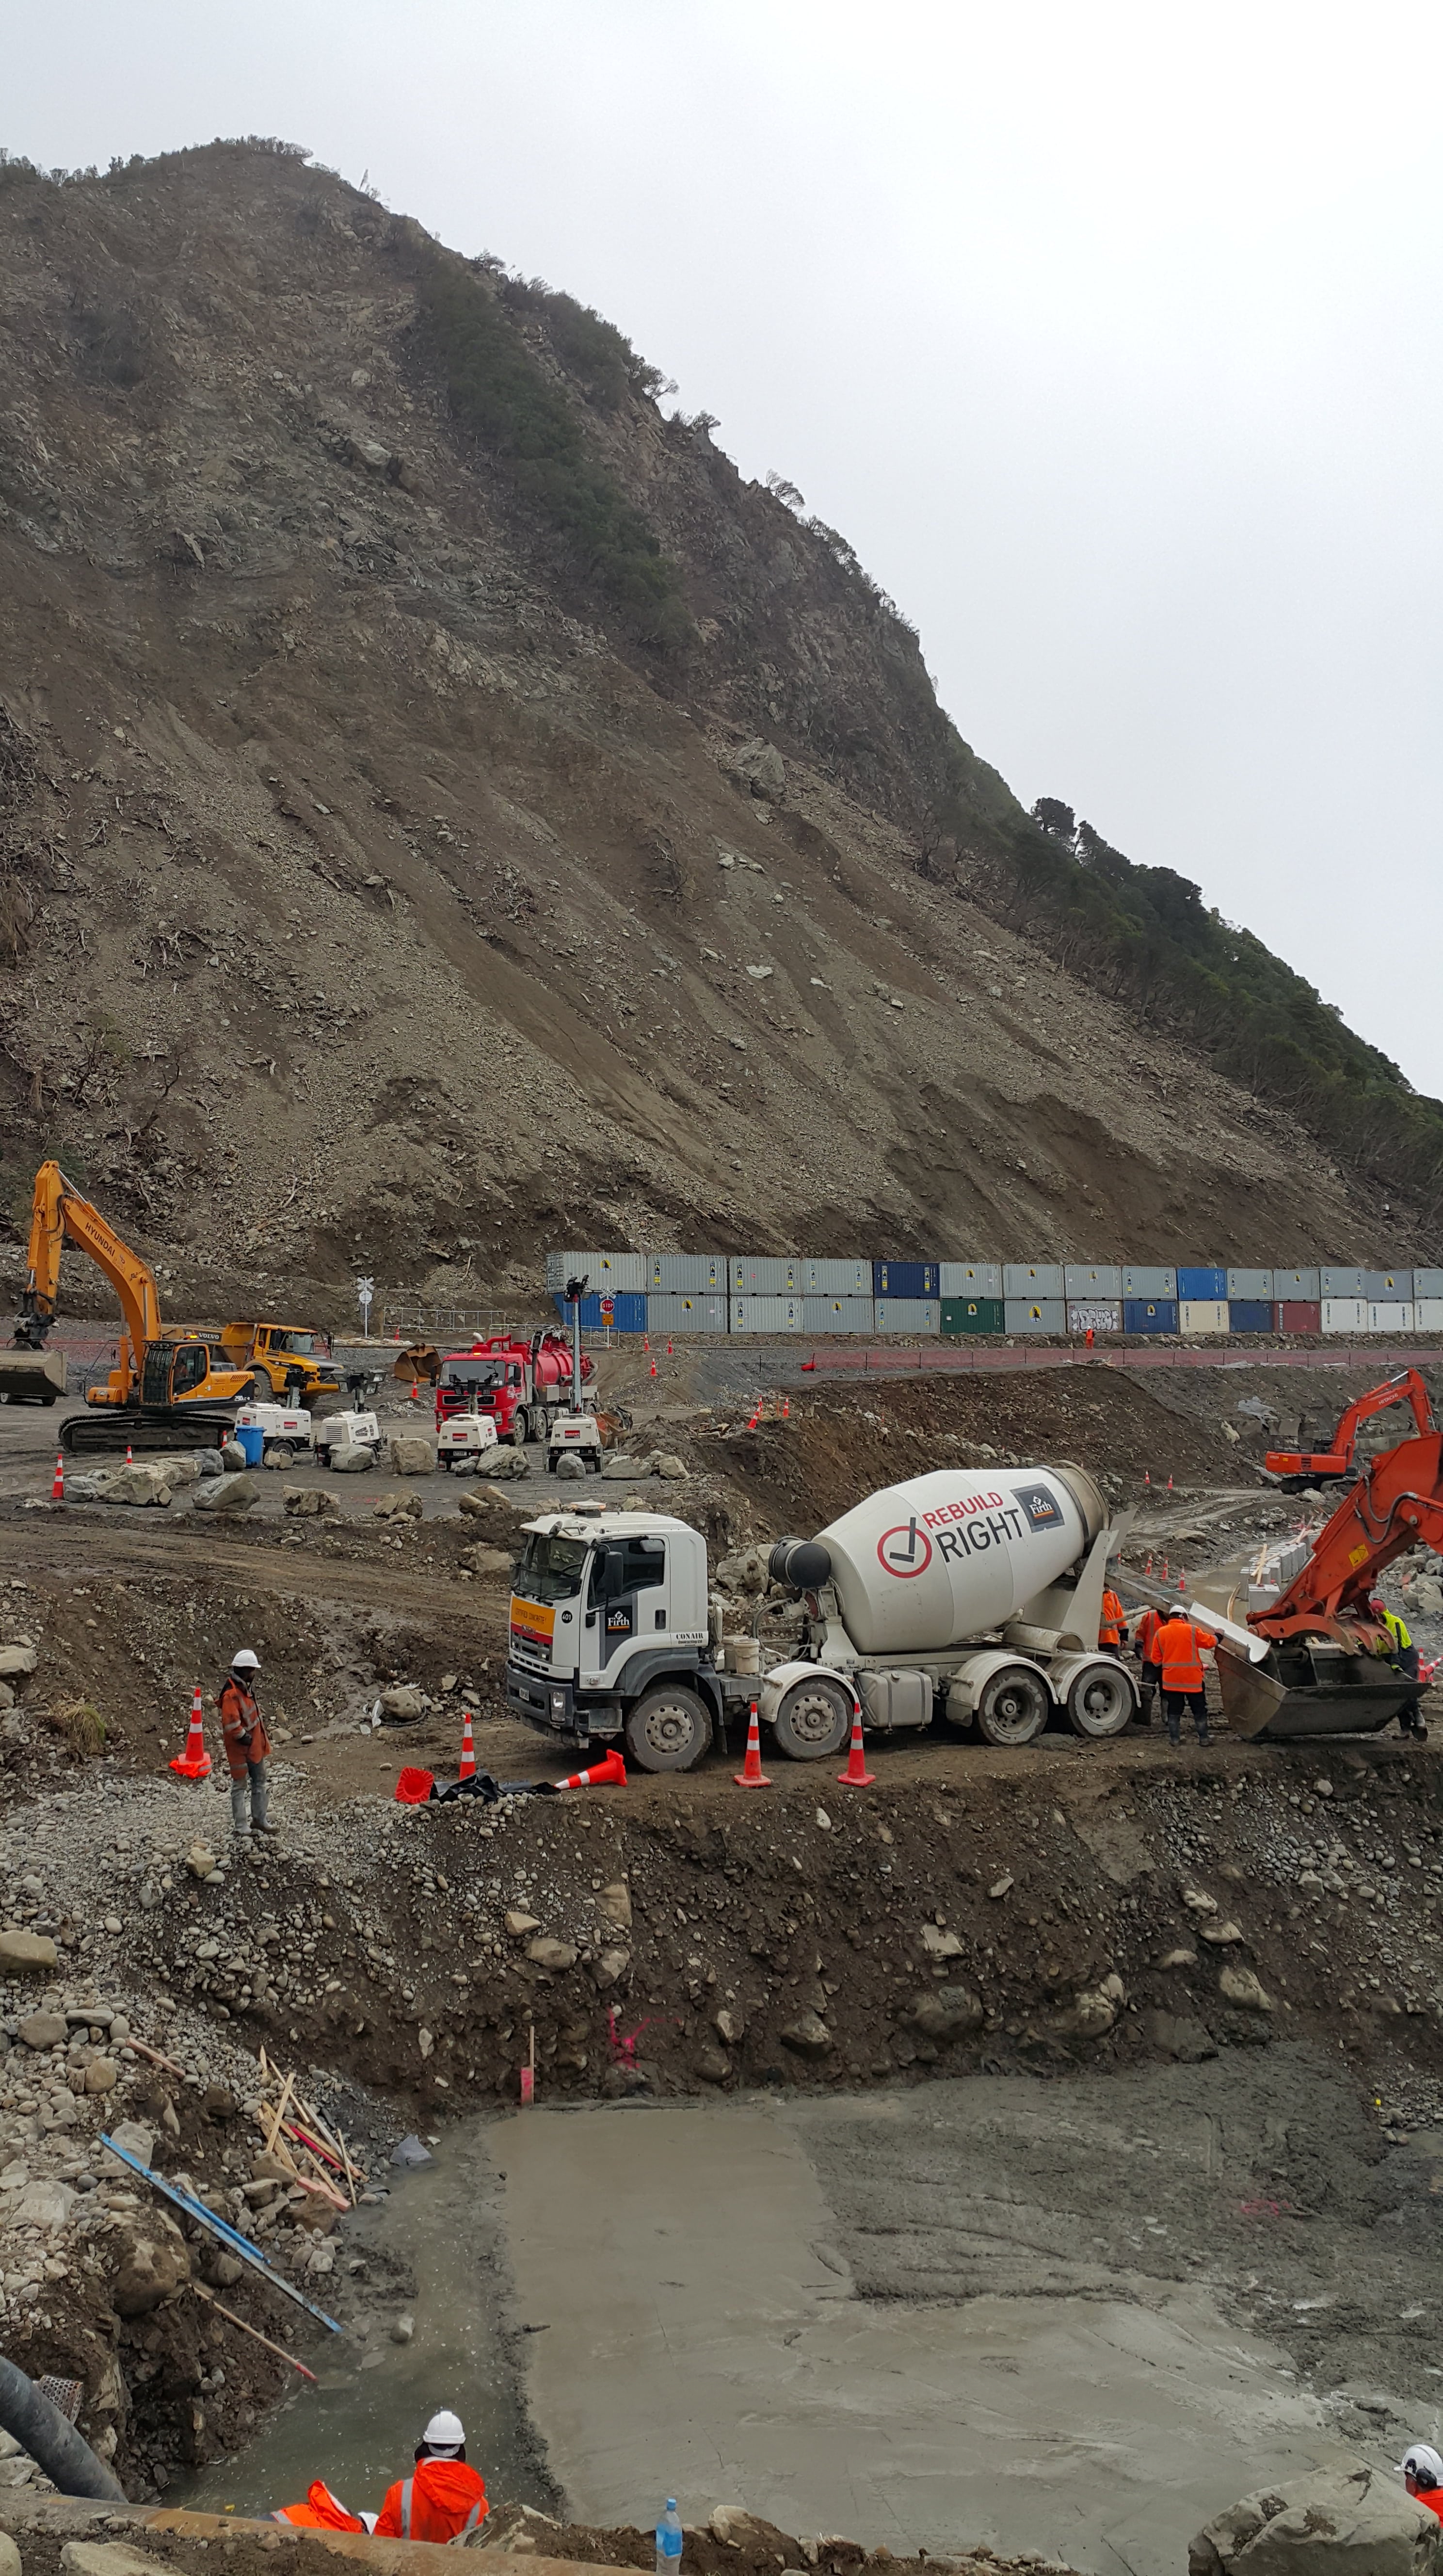 Firth helps with record supply of concrete in Kaikoura Image